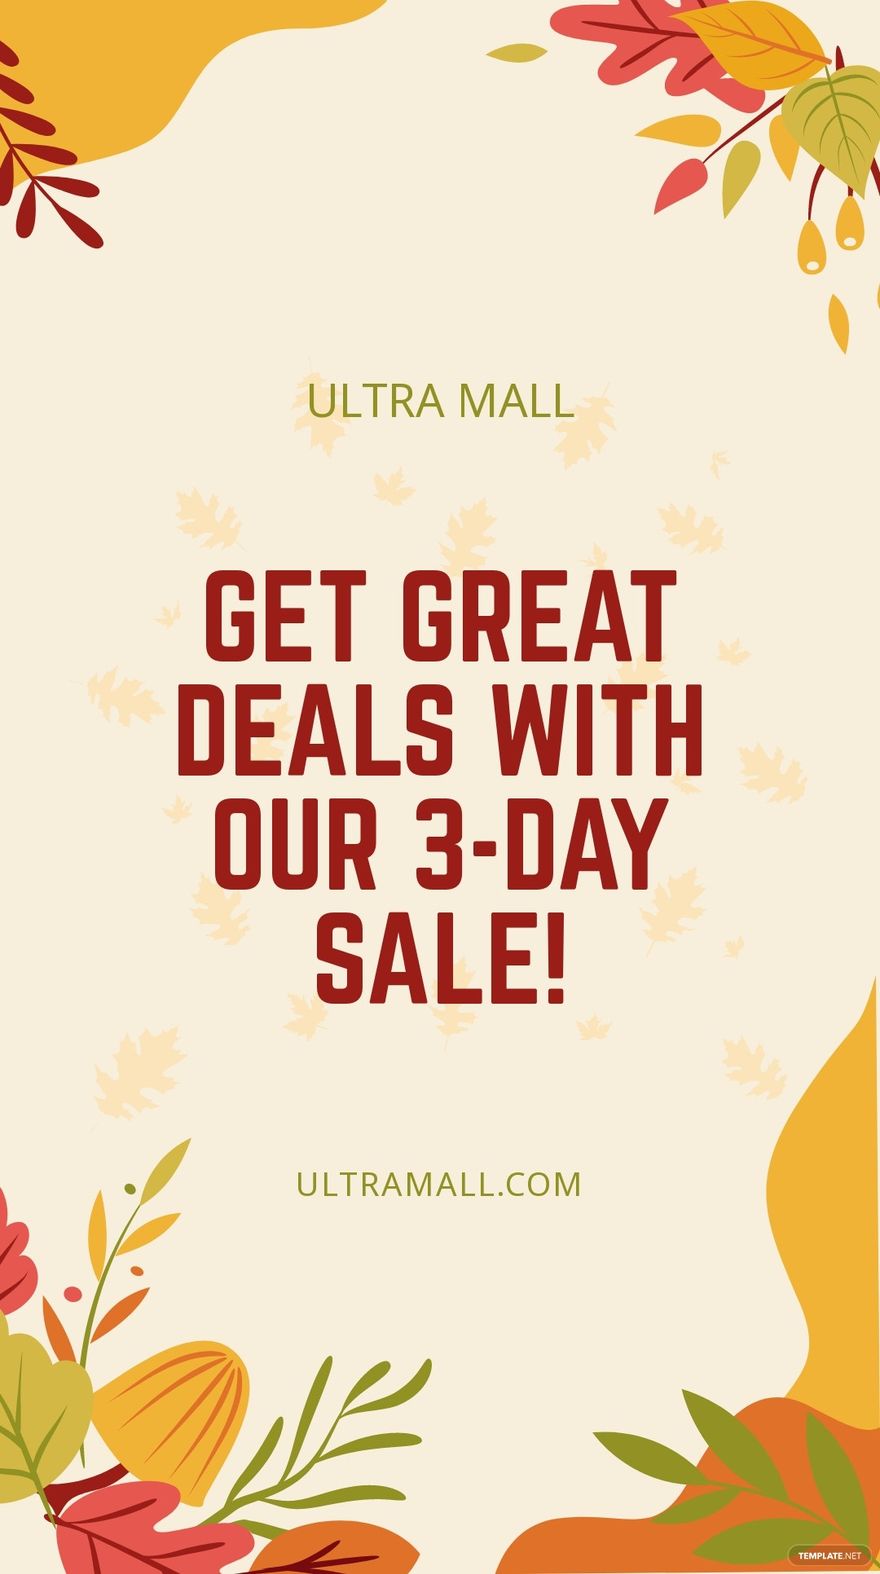 Fall/Autumn Sale Promotion Instagram Story Template